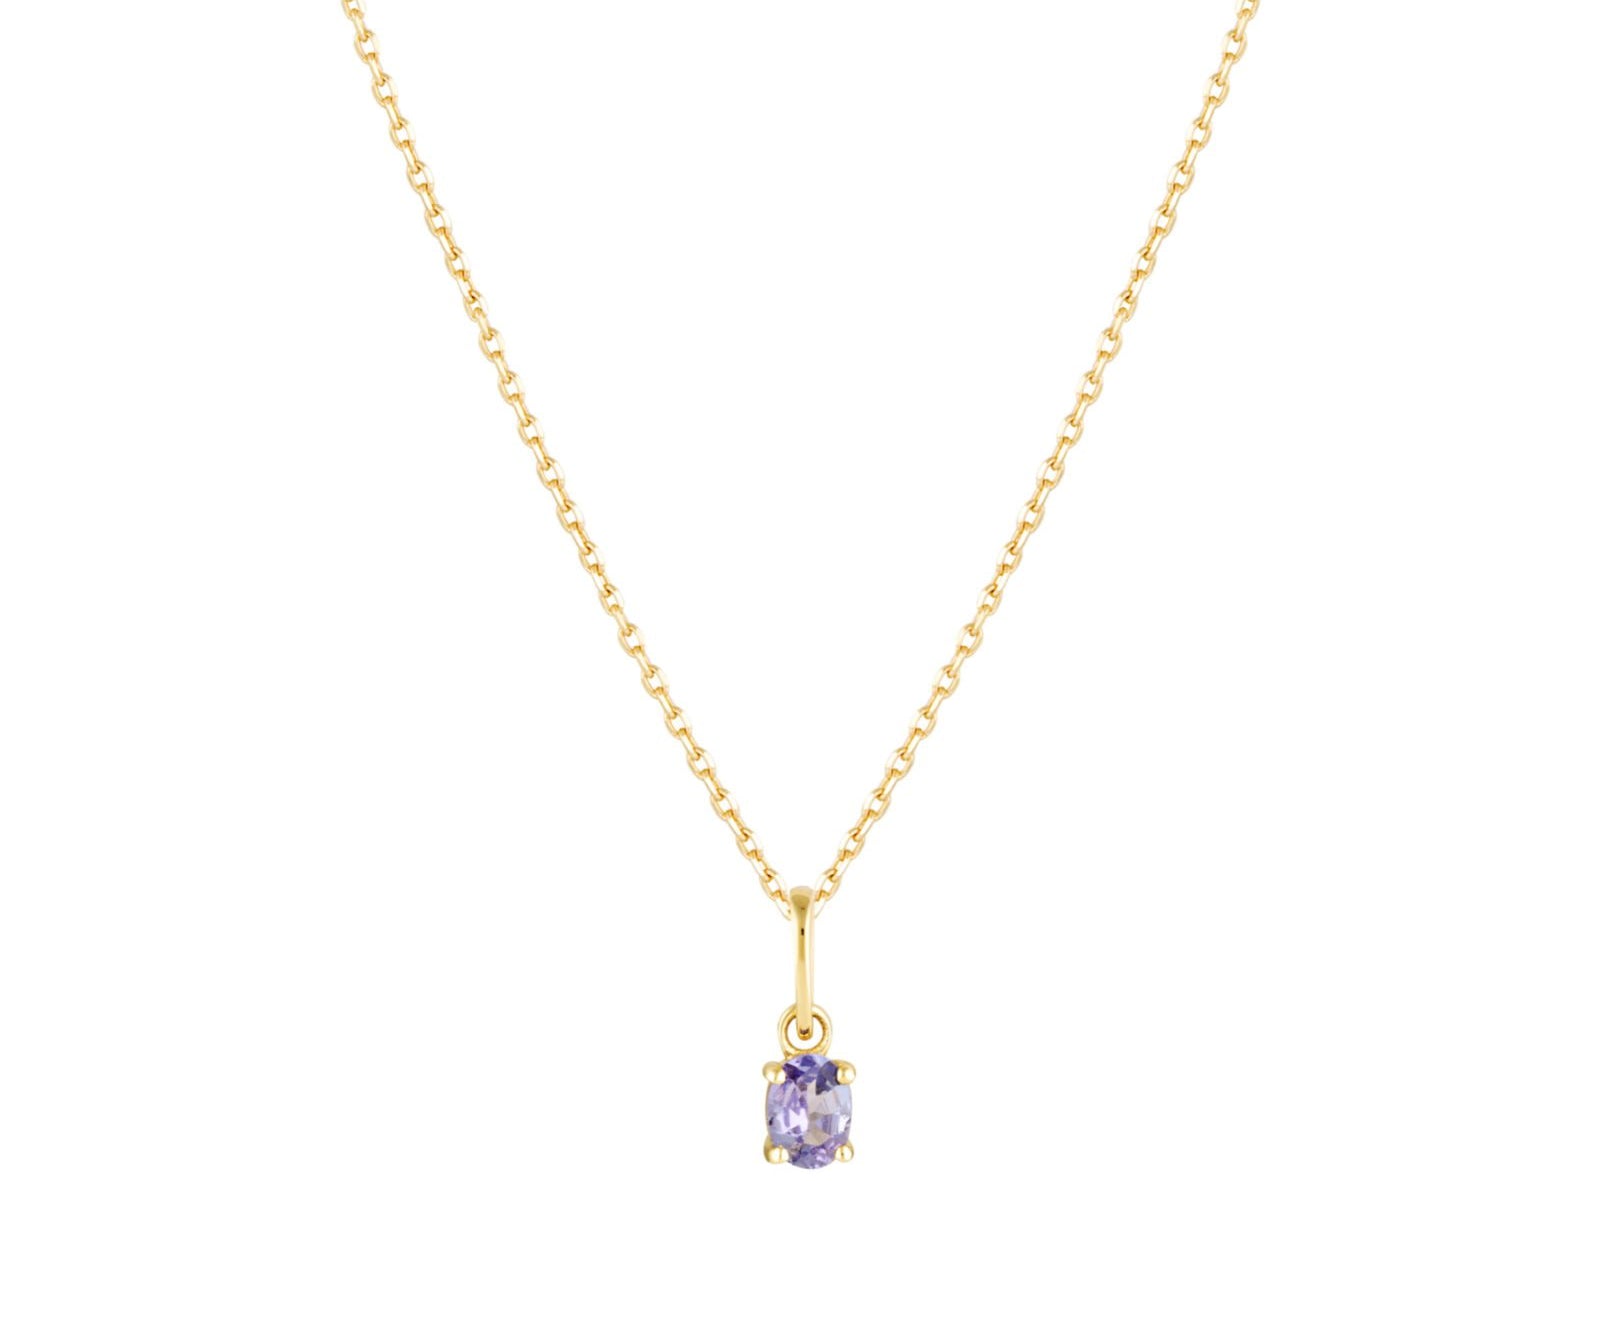 Picture of Luna Rae Solid 9k Gold Tazanite Necklace